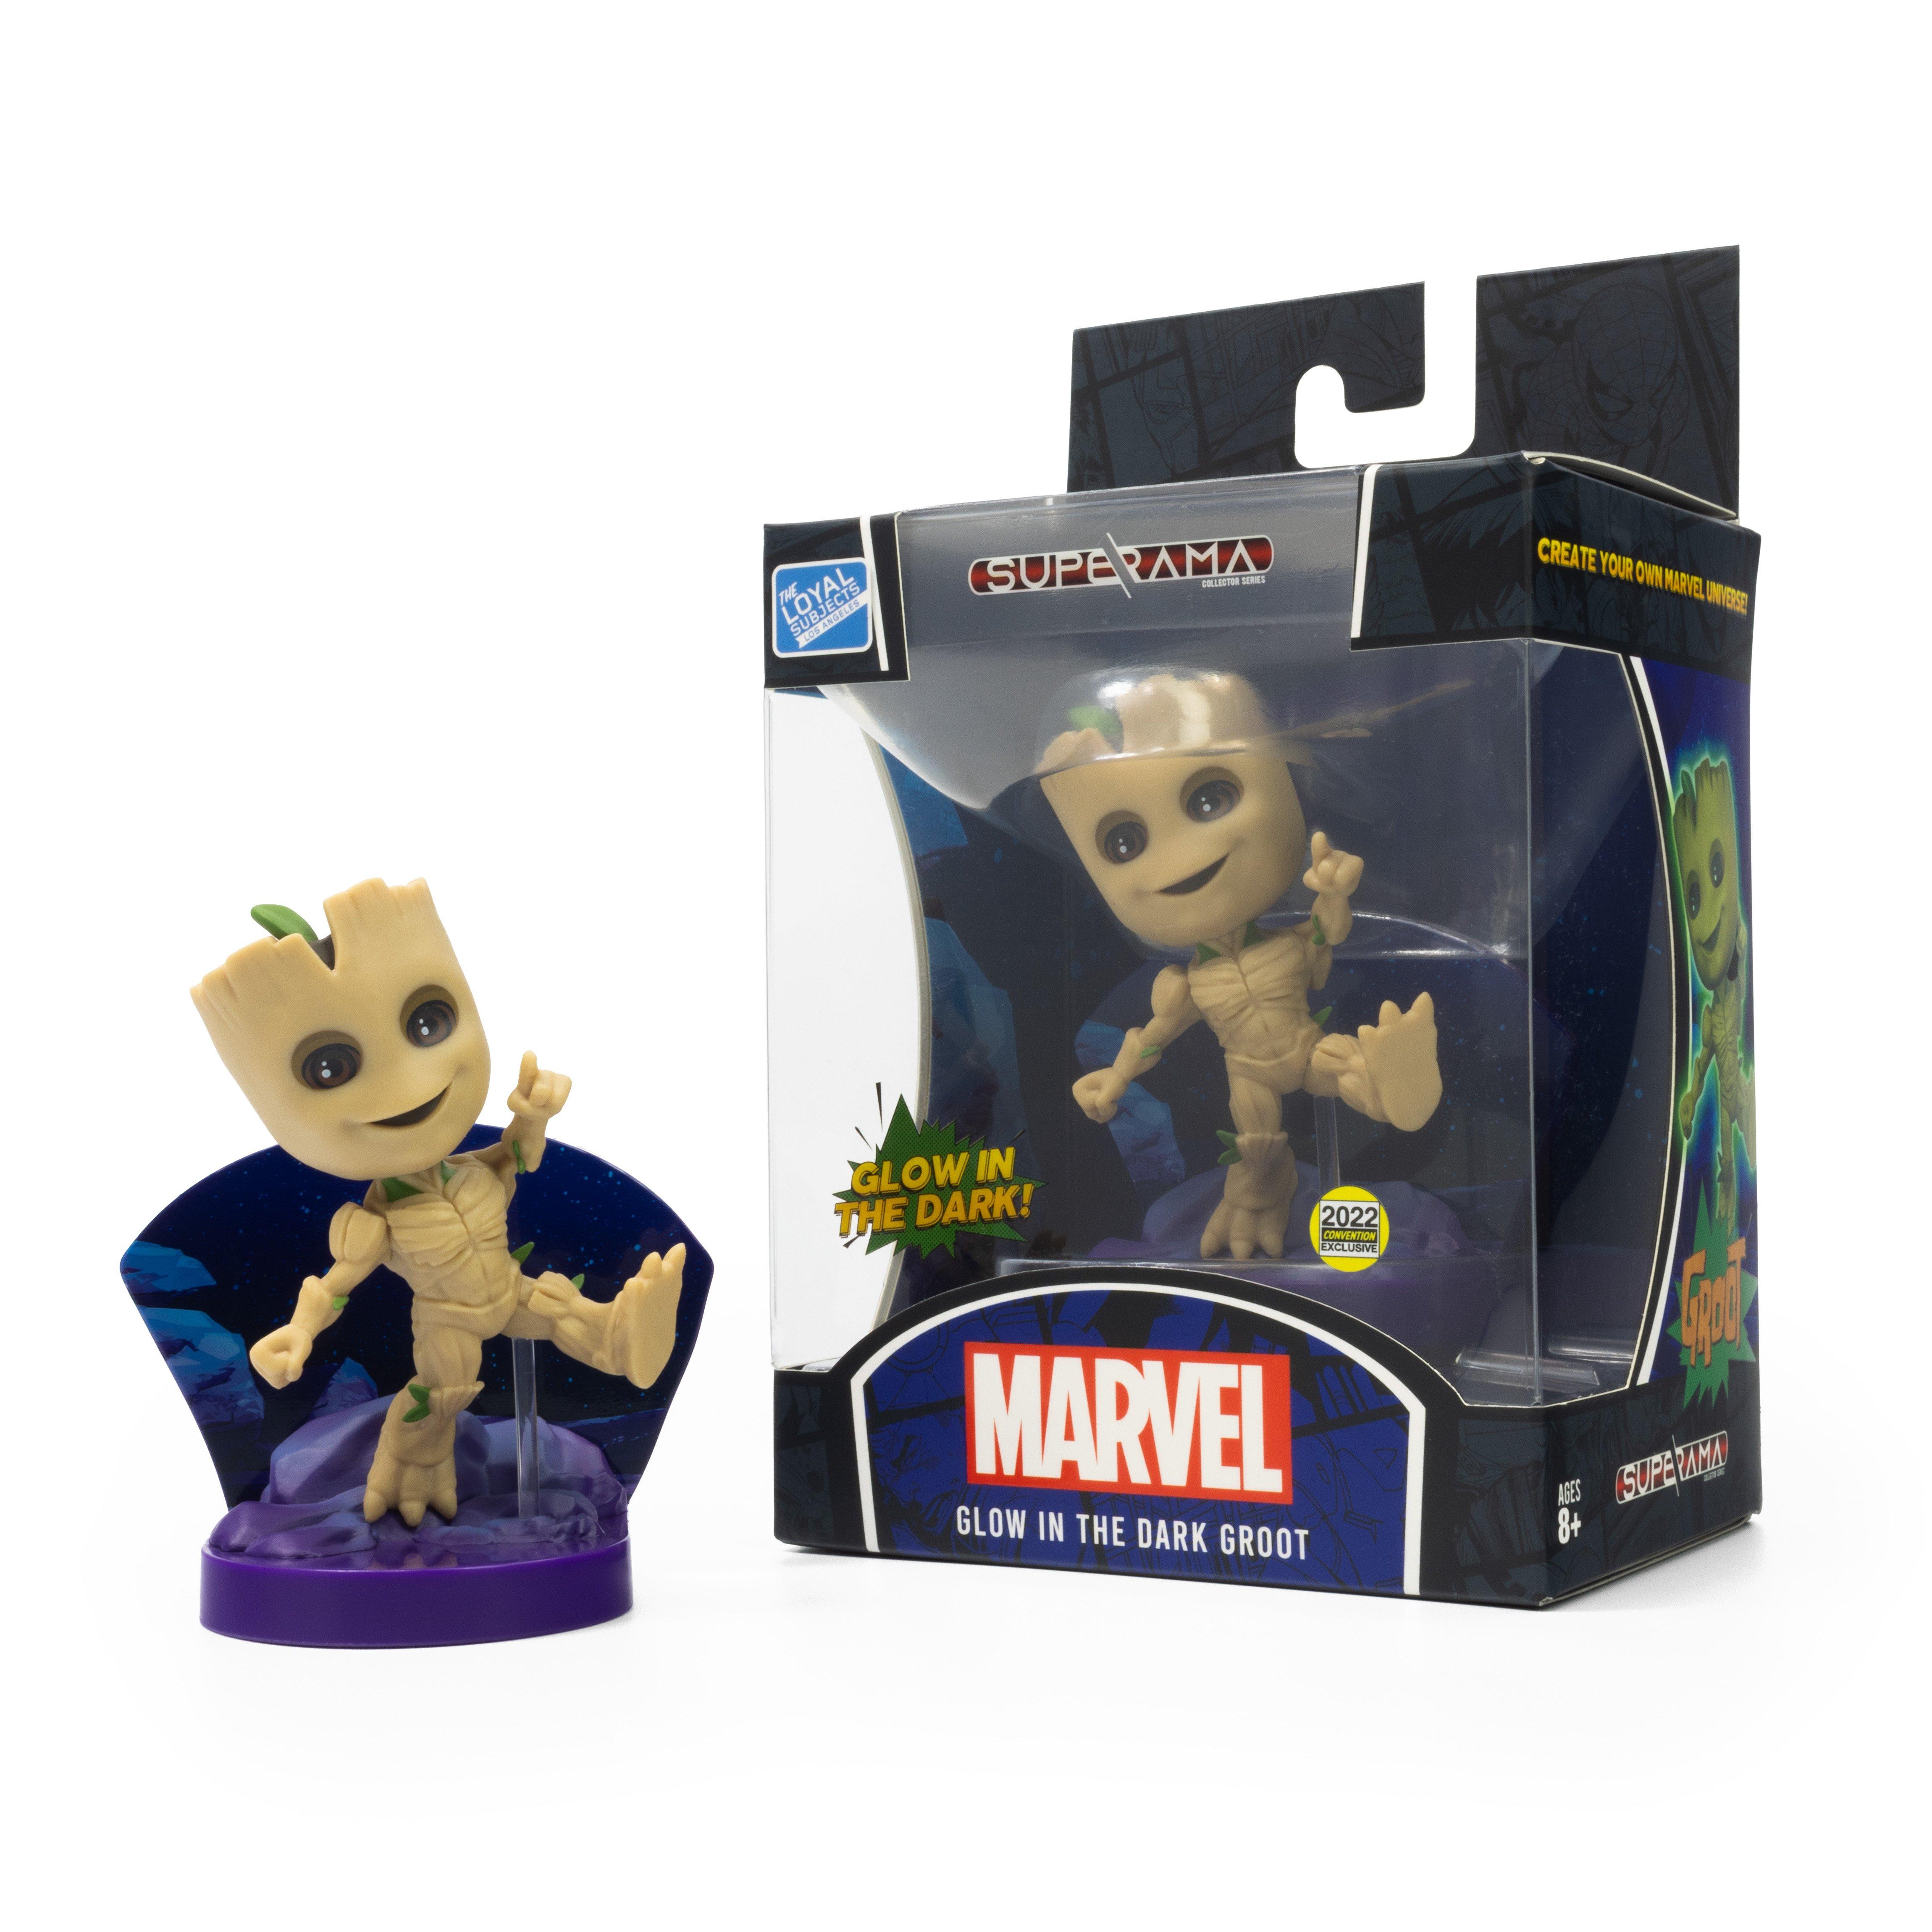 list item 2 of 10 The Loyal Subjects Marvel Superama Wave 1 Glow in the Dark Groot 4-in Statue GameStop Exclusive